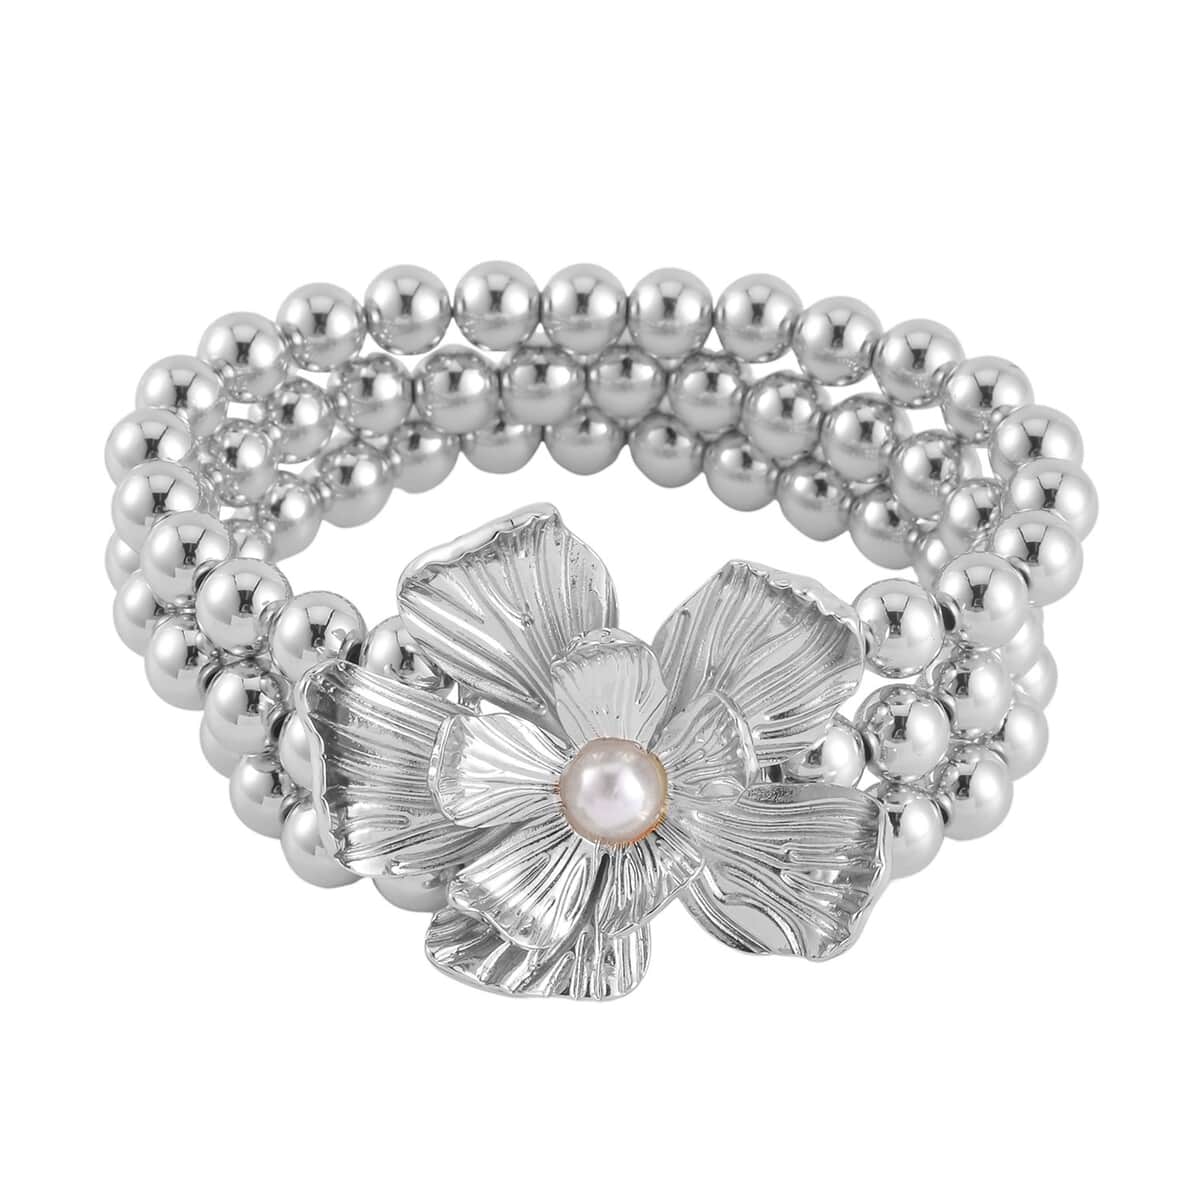 Simulated Pearl Flower Necklace and Bracelet (7-7.5In) and Earrings in Silvertone 16-20 Inches image number 4